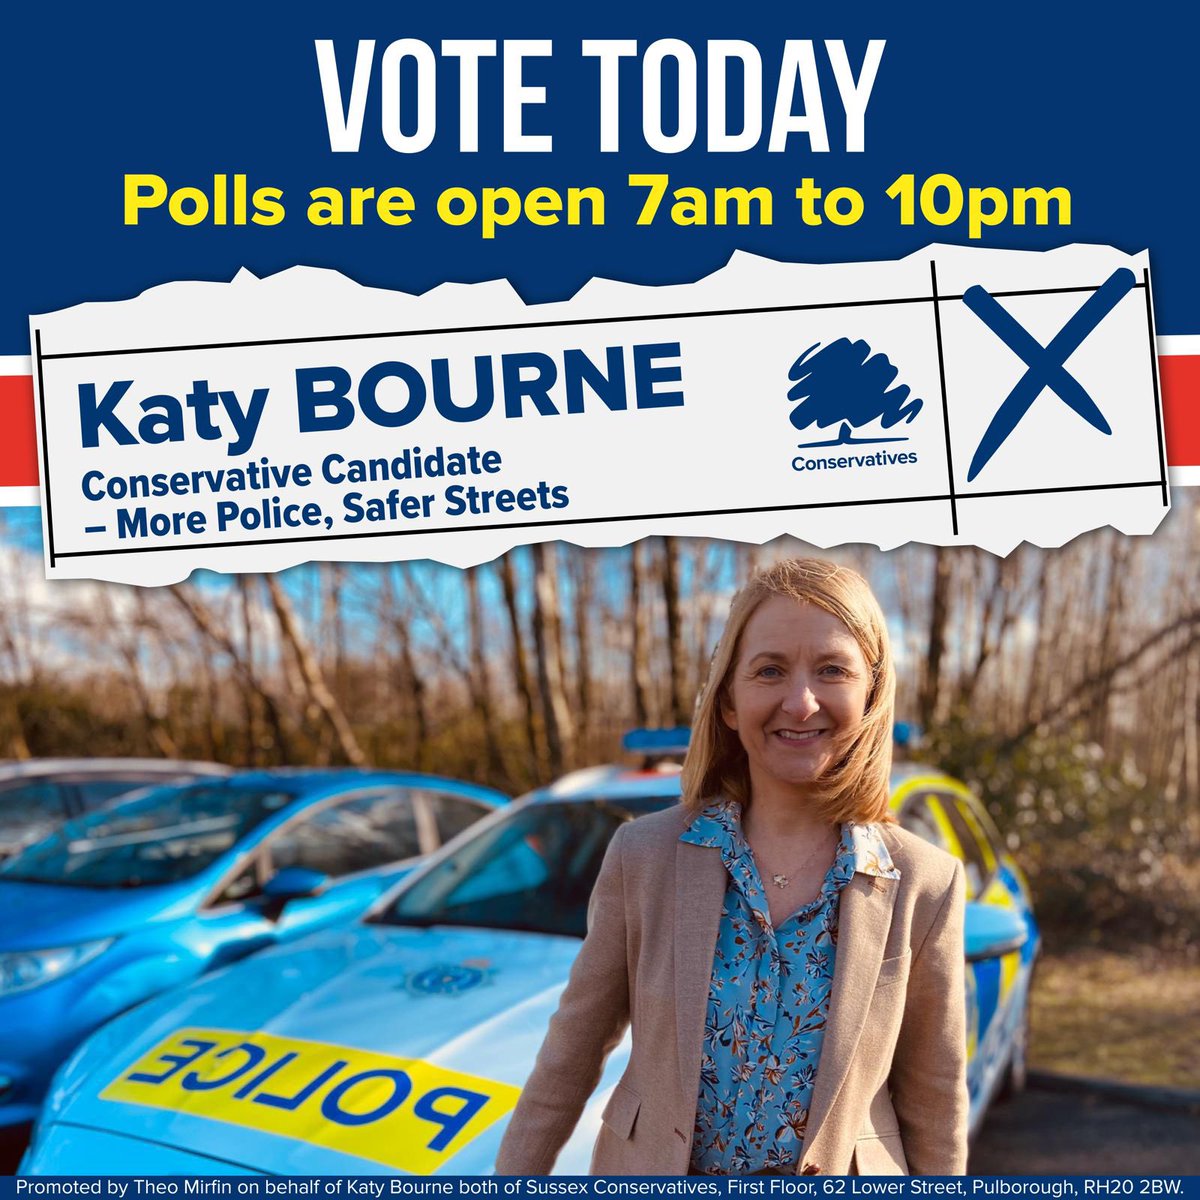 🗳️ Today, vote for Katy Bourne for Sussex Police & Crime Commissioner - More Police, Safer Streets. Use your vote today for Katy Bourne so that together we can continue to make Sussex safer. Over recent years, she has: ✔️Delivered the highest number of police officers in over